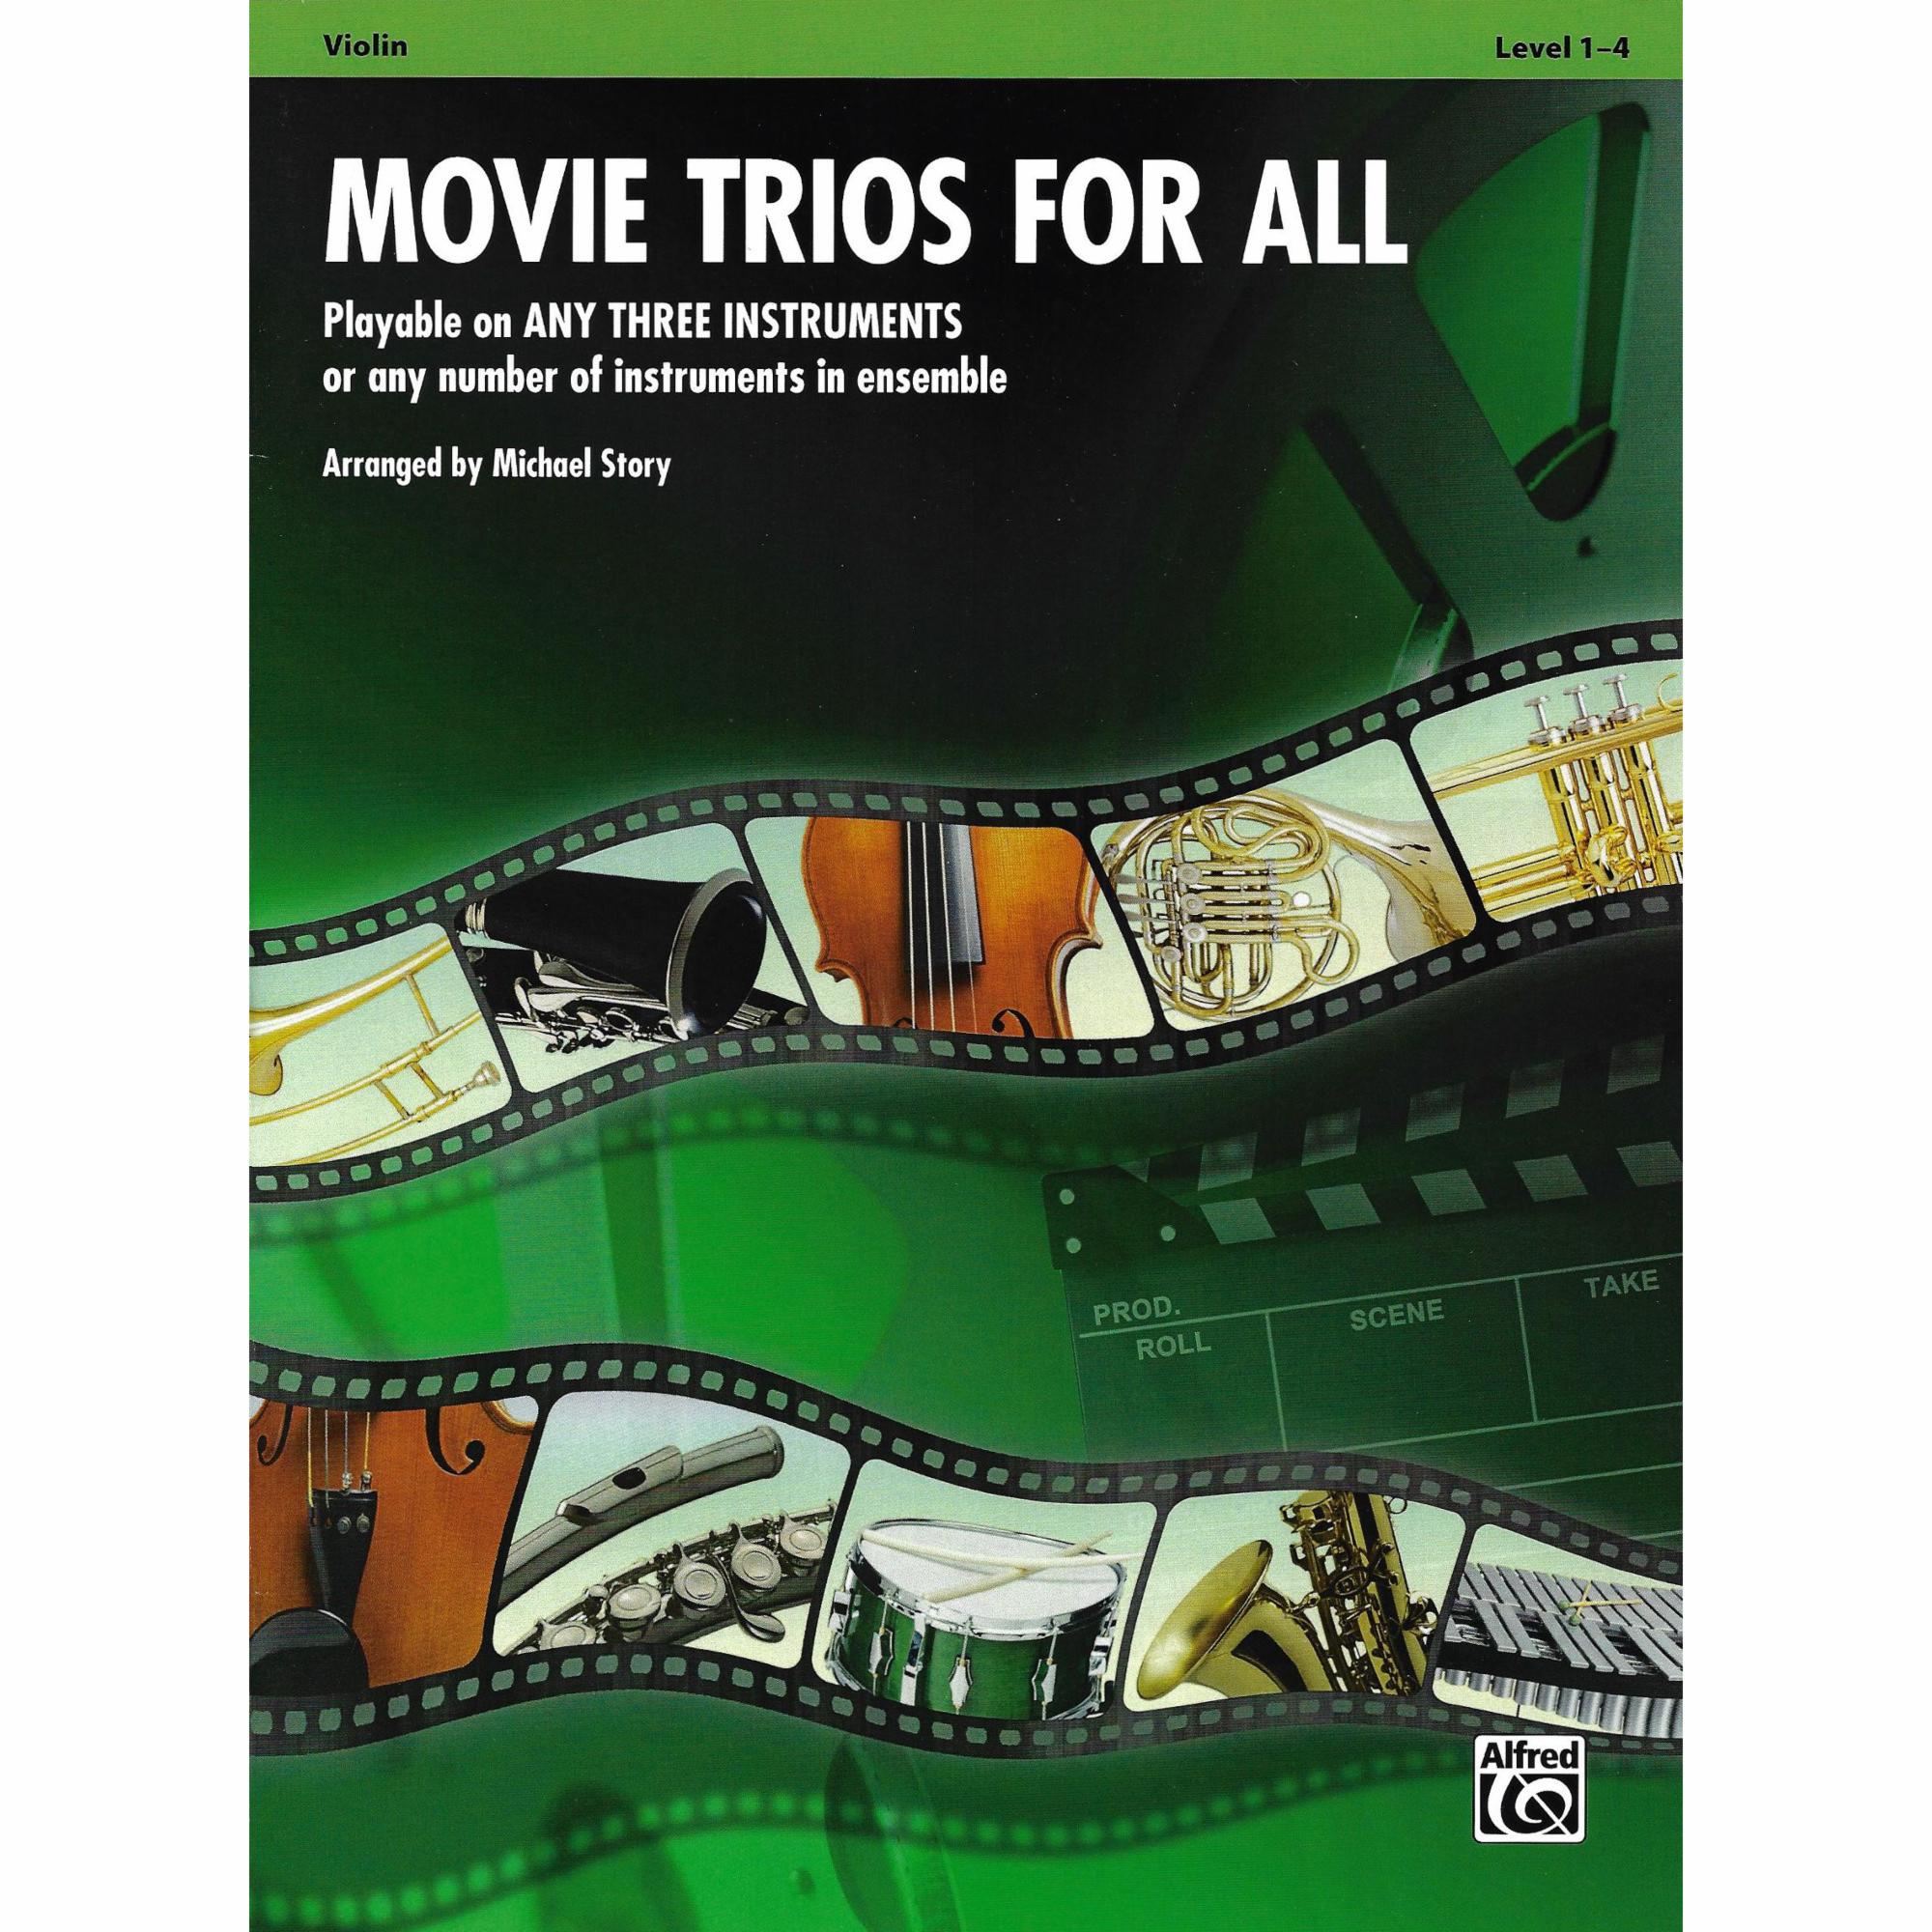 Movie Trios for All